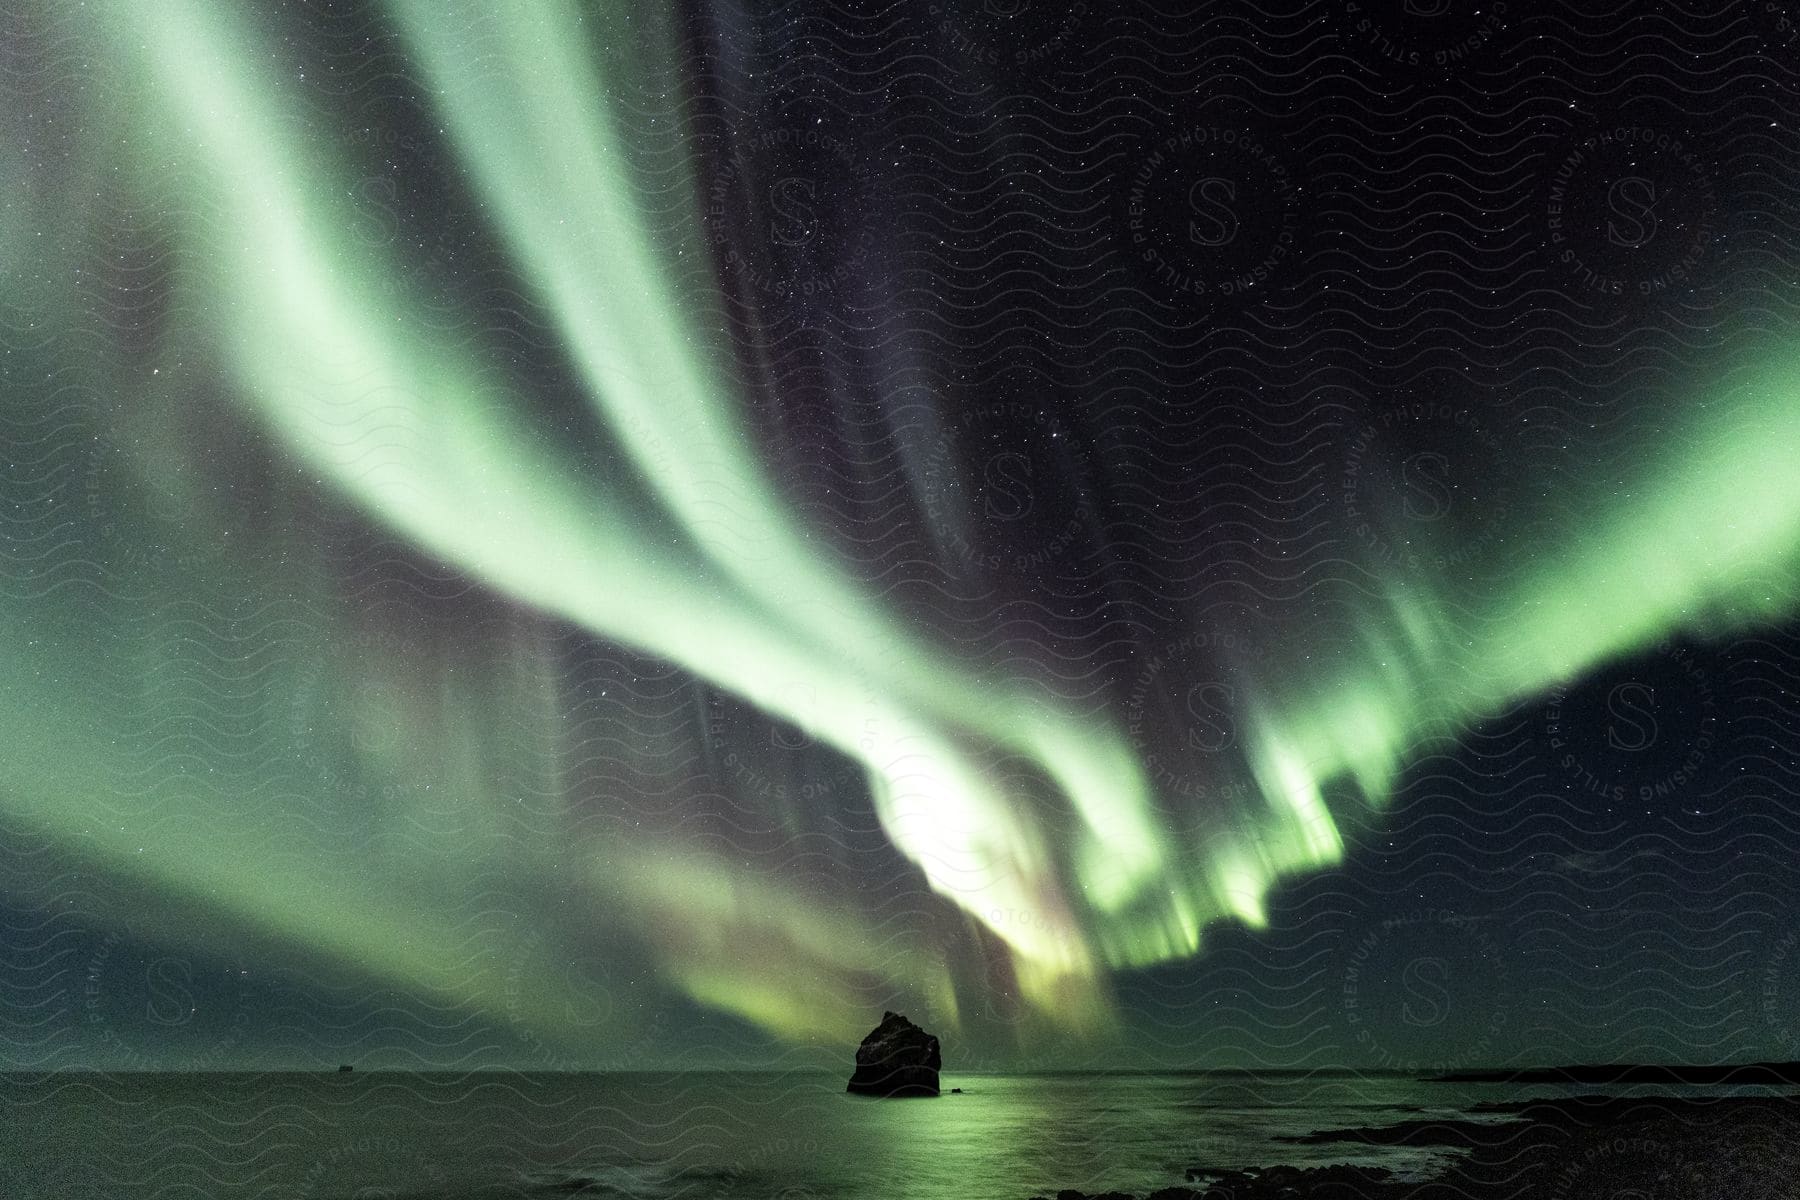 Wide landscape of the northern lights aurora borealis over the vast ocean at night